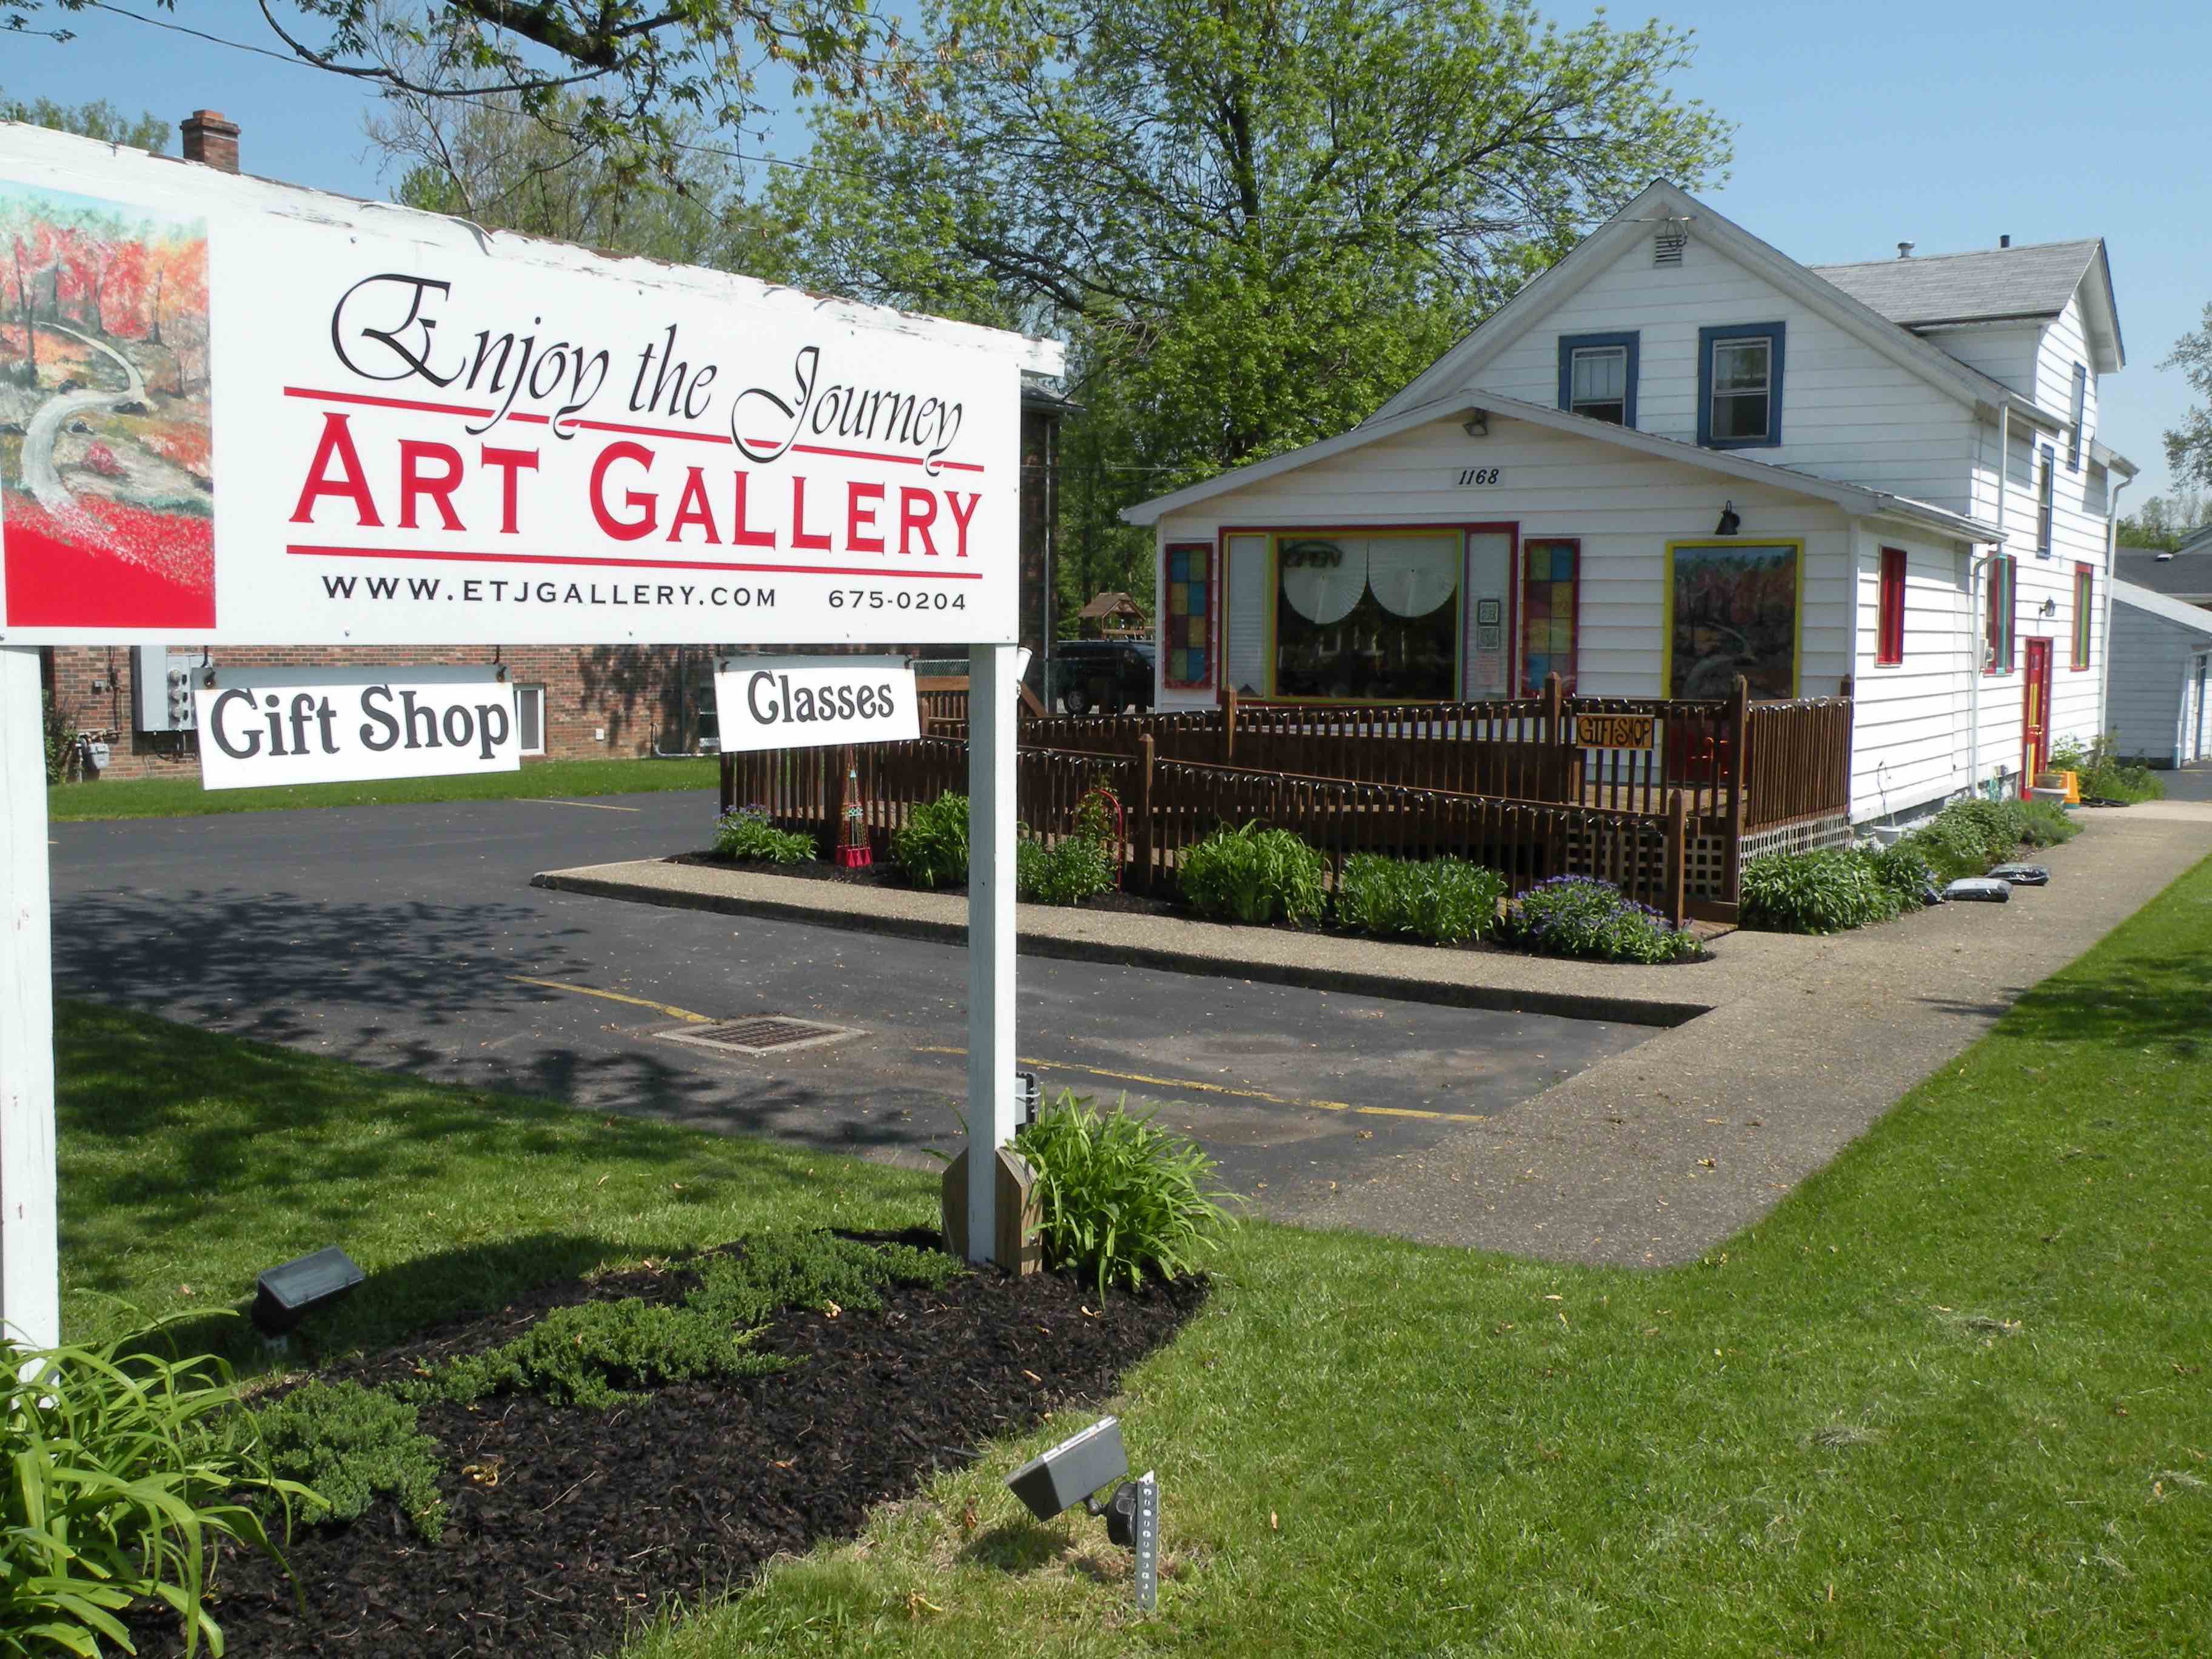 Enjoy The Journey Art Gallery announces a variety of creative events